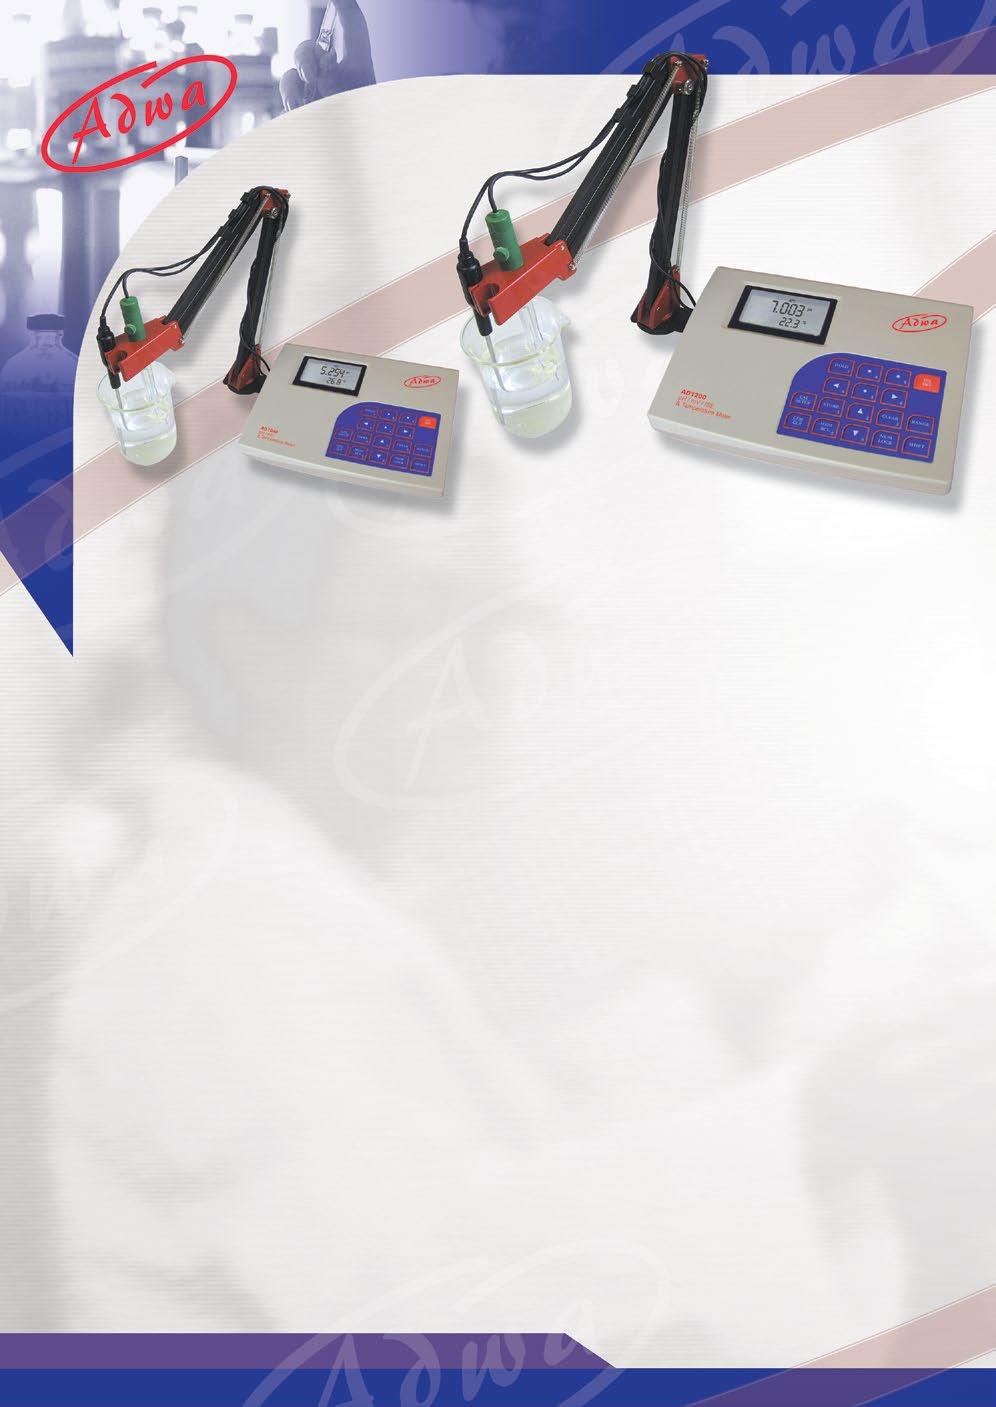 AD1000-AD1020 Professional Multi-Parameter -ORP-ISE-arature Benchtop Meters with RS232/USB interface & GLP AD1000 and AD1020 are professional benchtop meters with ranges for, ORP (Oxidation Reduction